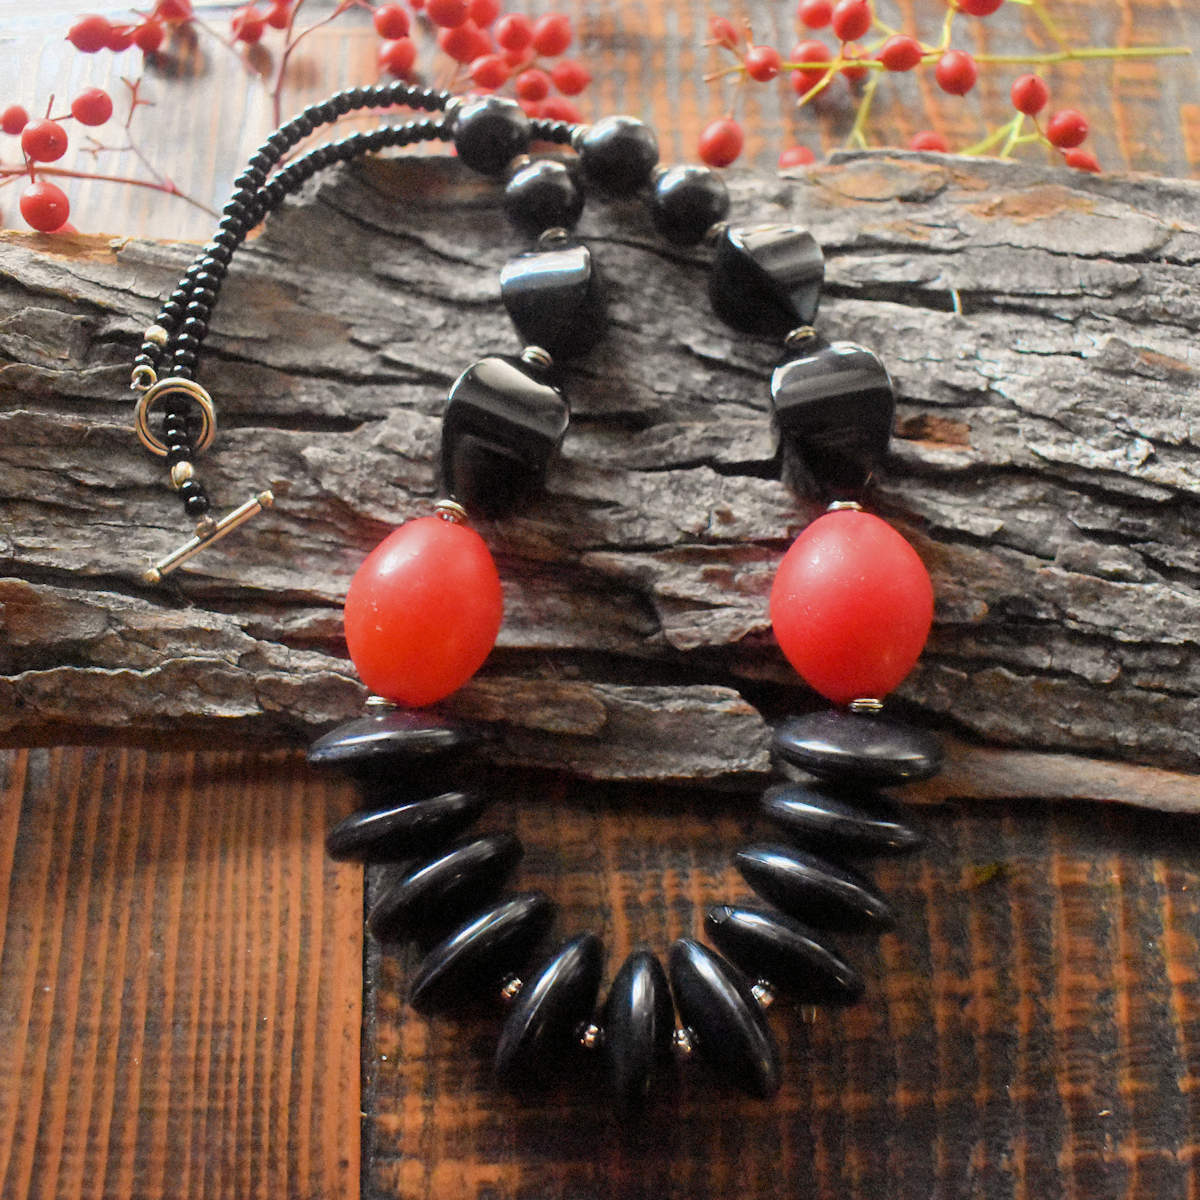 A black and red statement necklace is draped over a wood backdrop with red berries in the background. The necklace has a swath of chunky black discs in the center, bright red ovals, and then a series of black beads that decrease in size, with a few inches of black seed beads at the back. There is a silver toggle clasp.